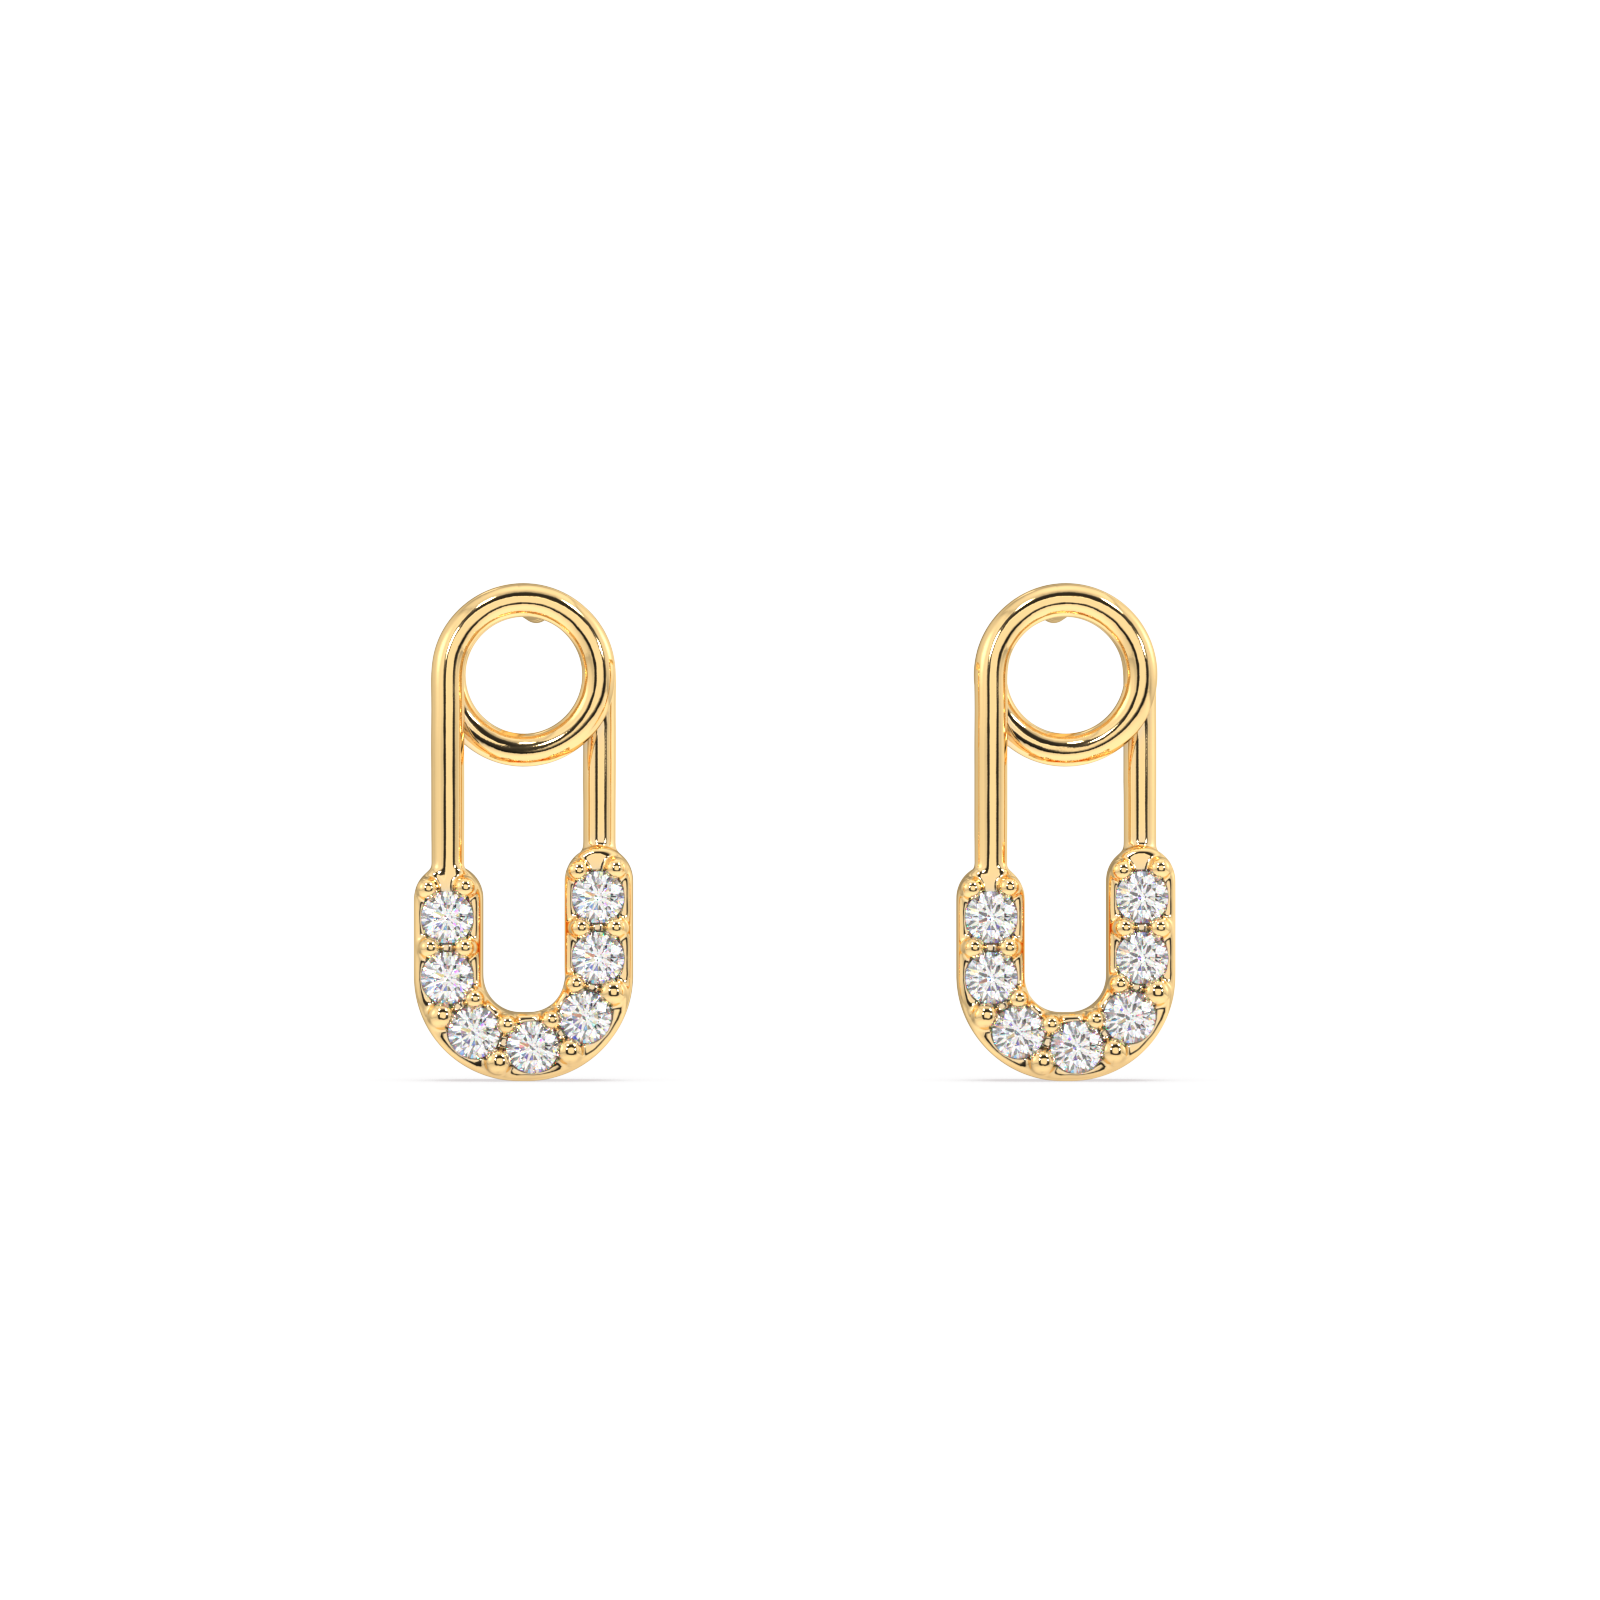 Zirconia Safety pin stud earring - Pair